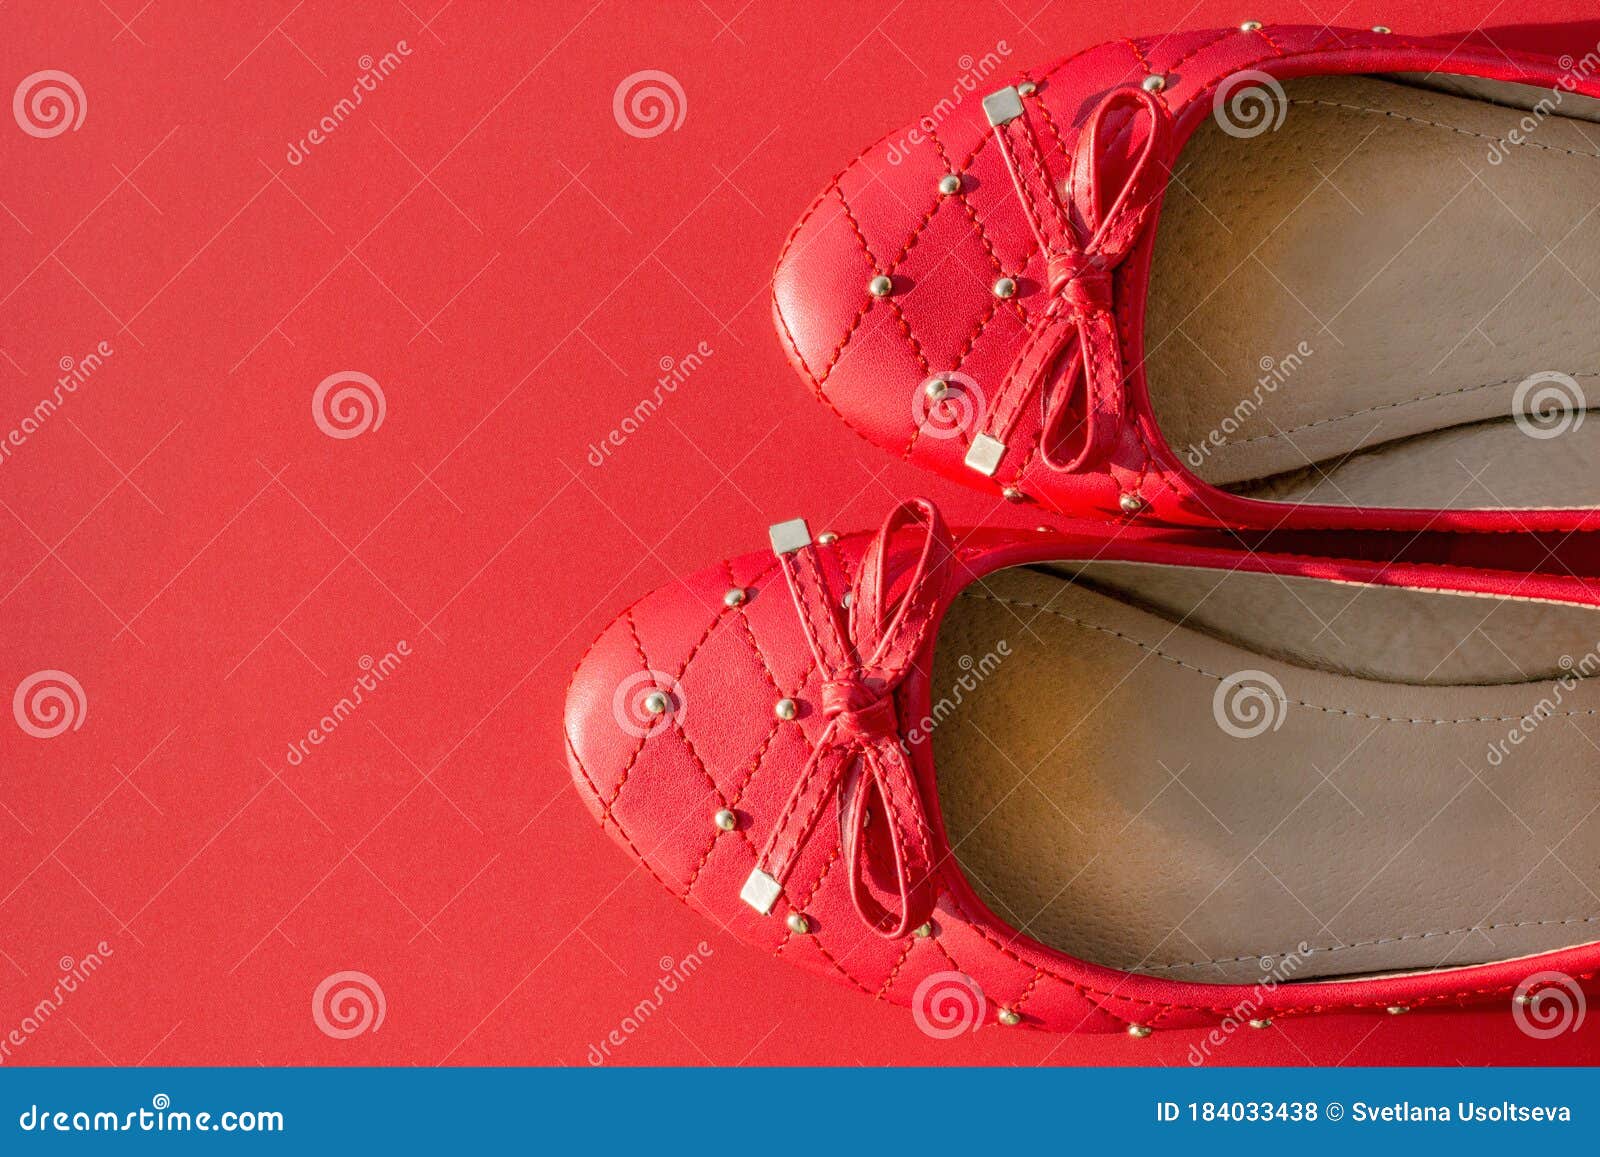 Fashion. Women`s Red Shoes on a Red Background Shoes. Stylish Summer ...